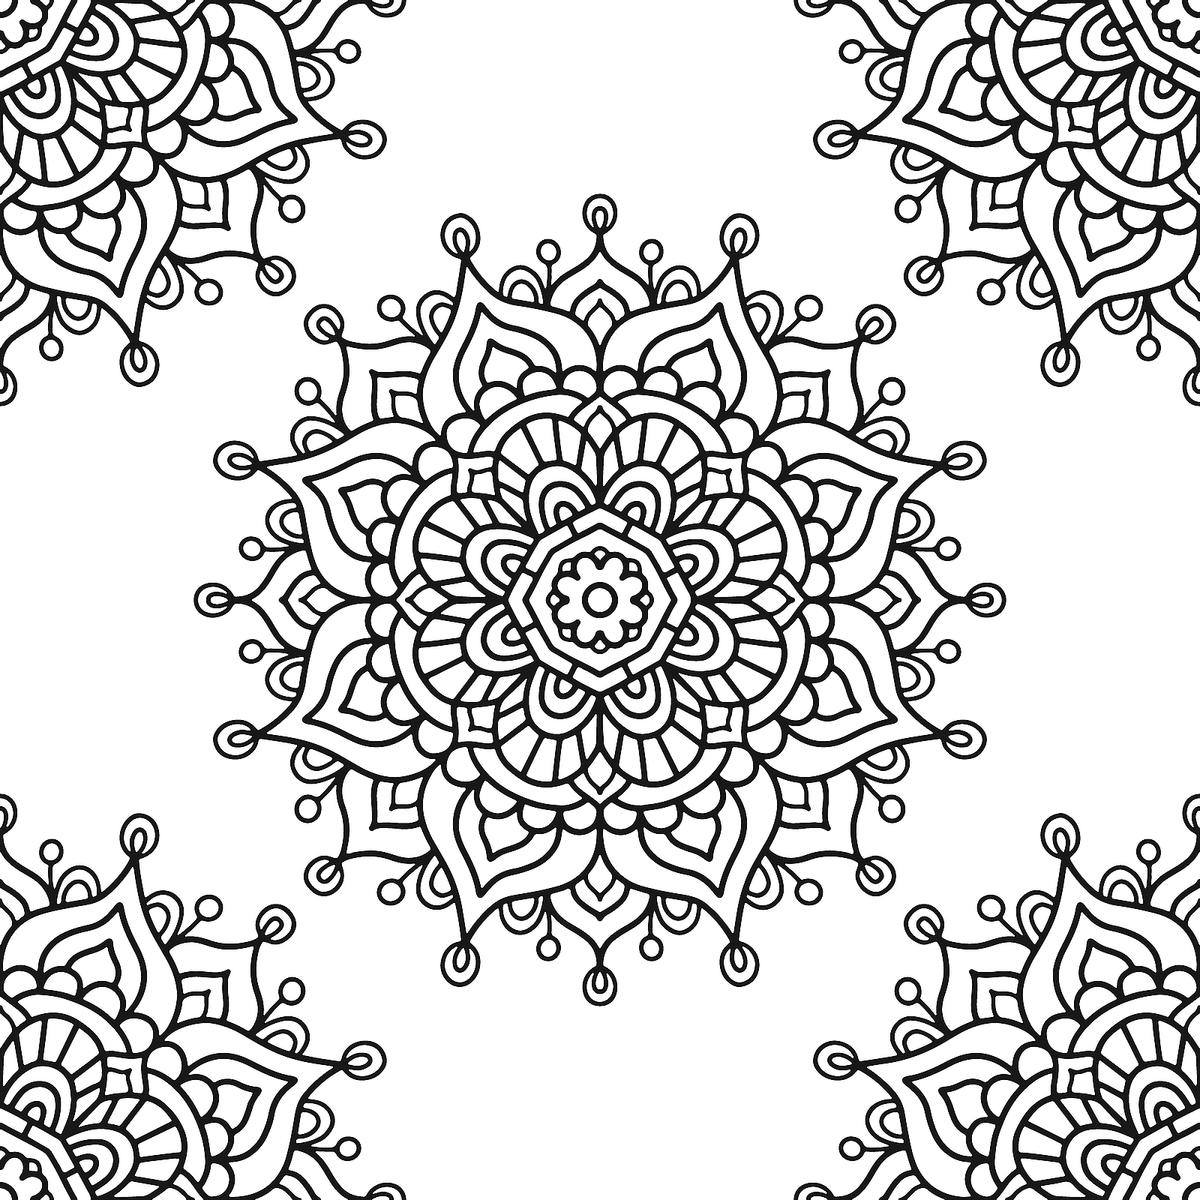 Mandala coloring pages free printable coloring pages of mandalas for adults kids printables mom